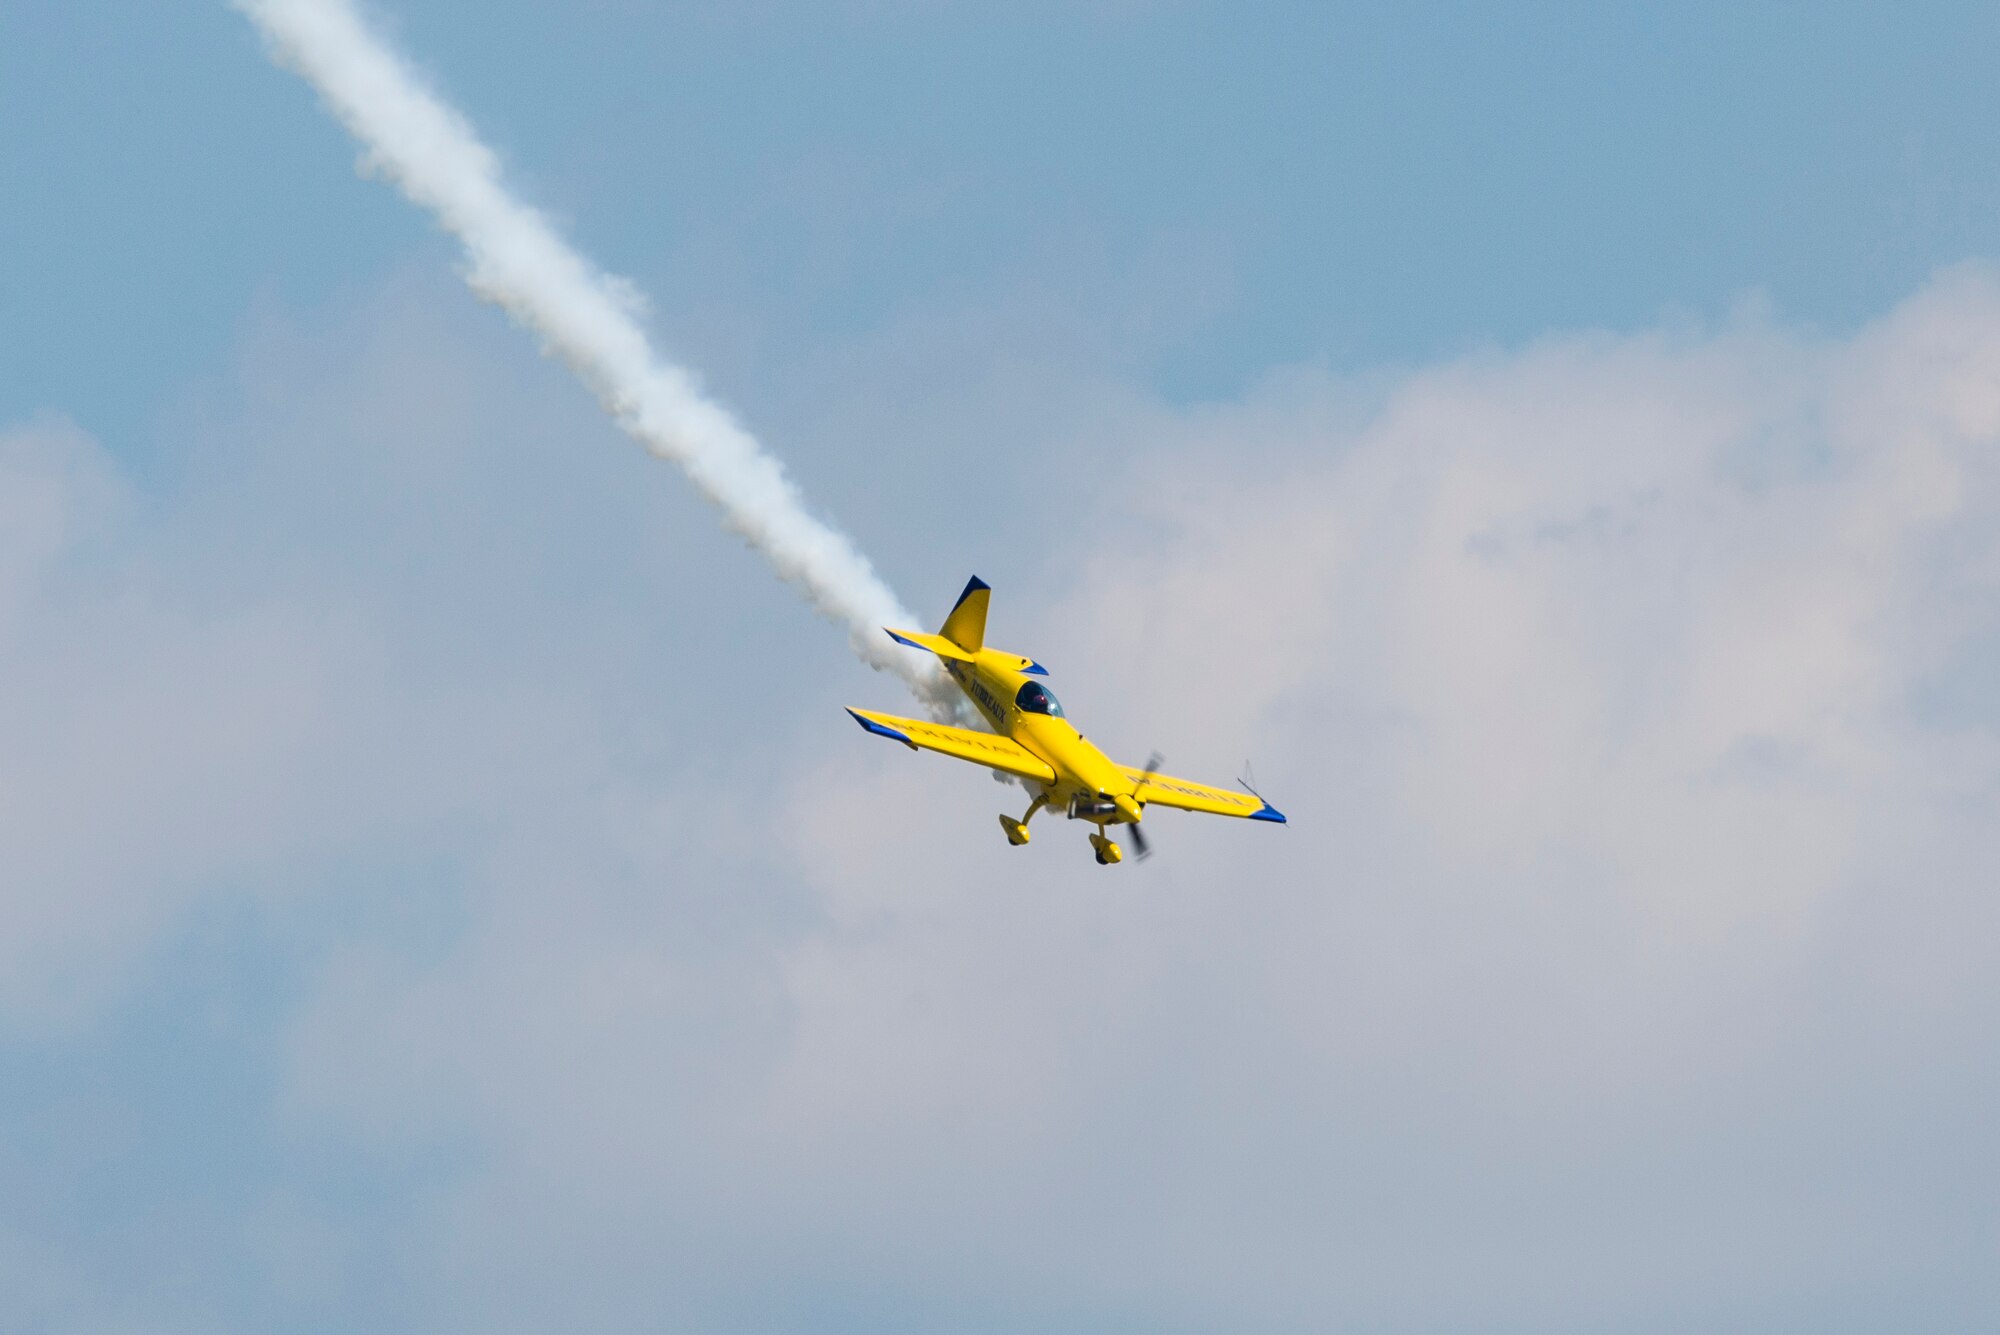 Kevin Coleman performs during the 100th Centennial Celebration Air Show, June 11, 2017, at Scott Air Force Base, Ill. Kevin has accumulated more than 2500 hours of flying time. He has been recognized as the highest placing contender at the 2007 Aerobatic Championship, and the next year clinched third place at the same event. He is contracted to perform year-round in the air show circuit across the country, and in 2015, a lifetime of practice paid off when he earned a position on the U.S. Advanced Aerobatic Team – the Olympics of aviation.